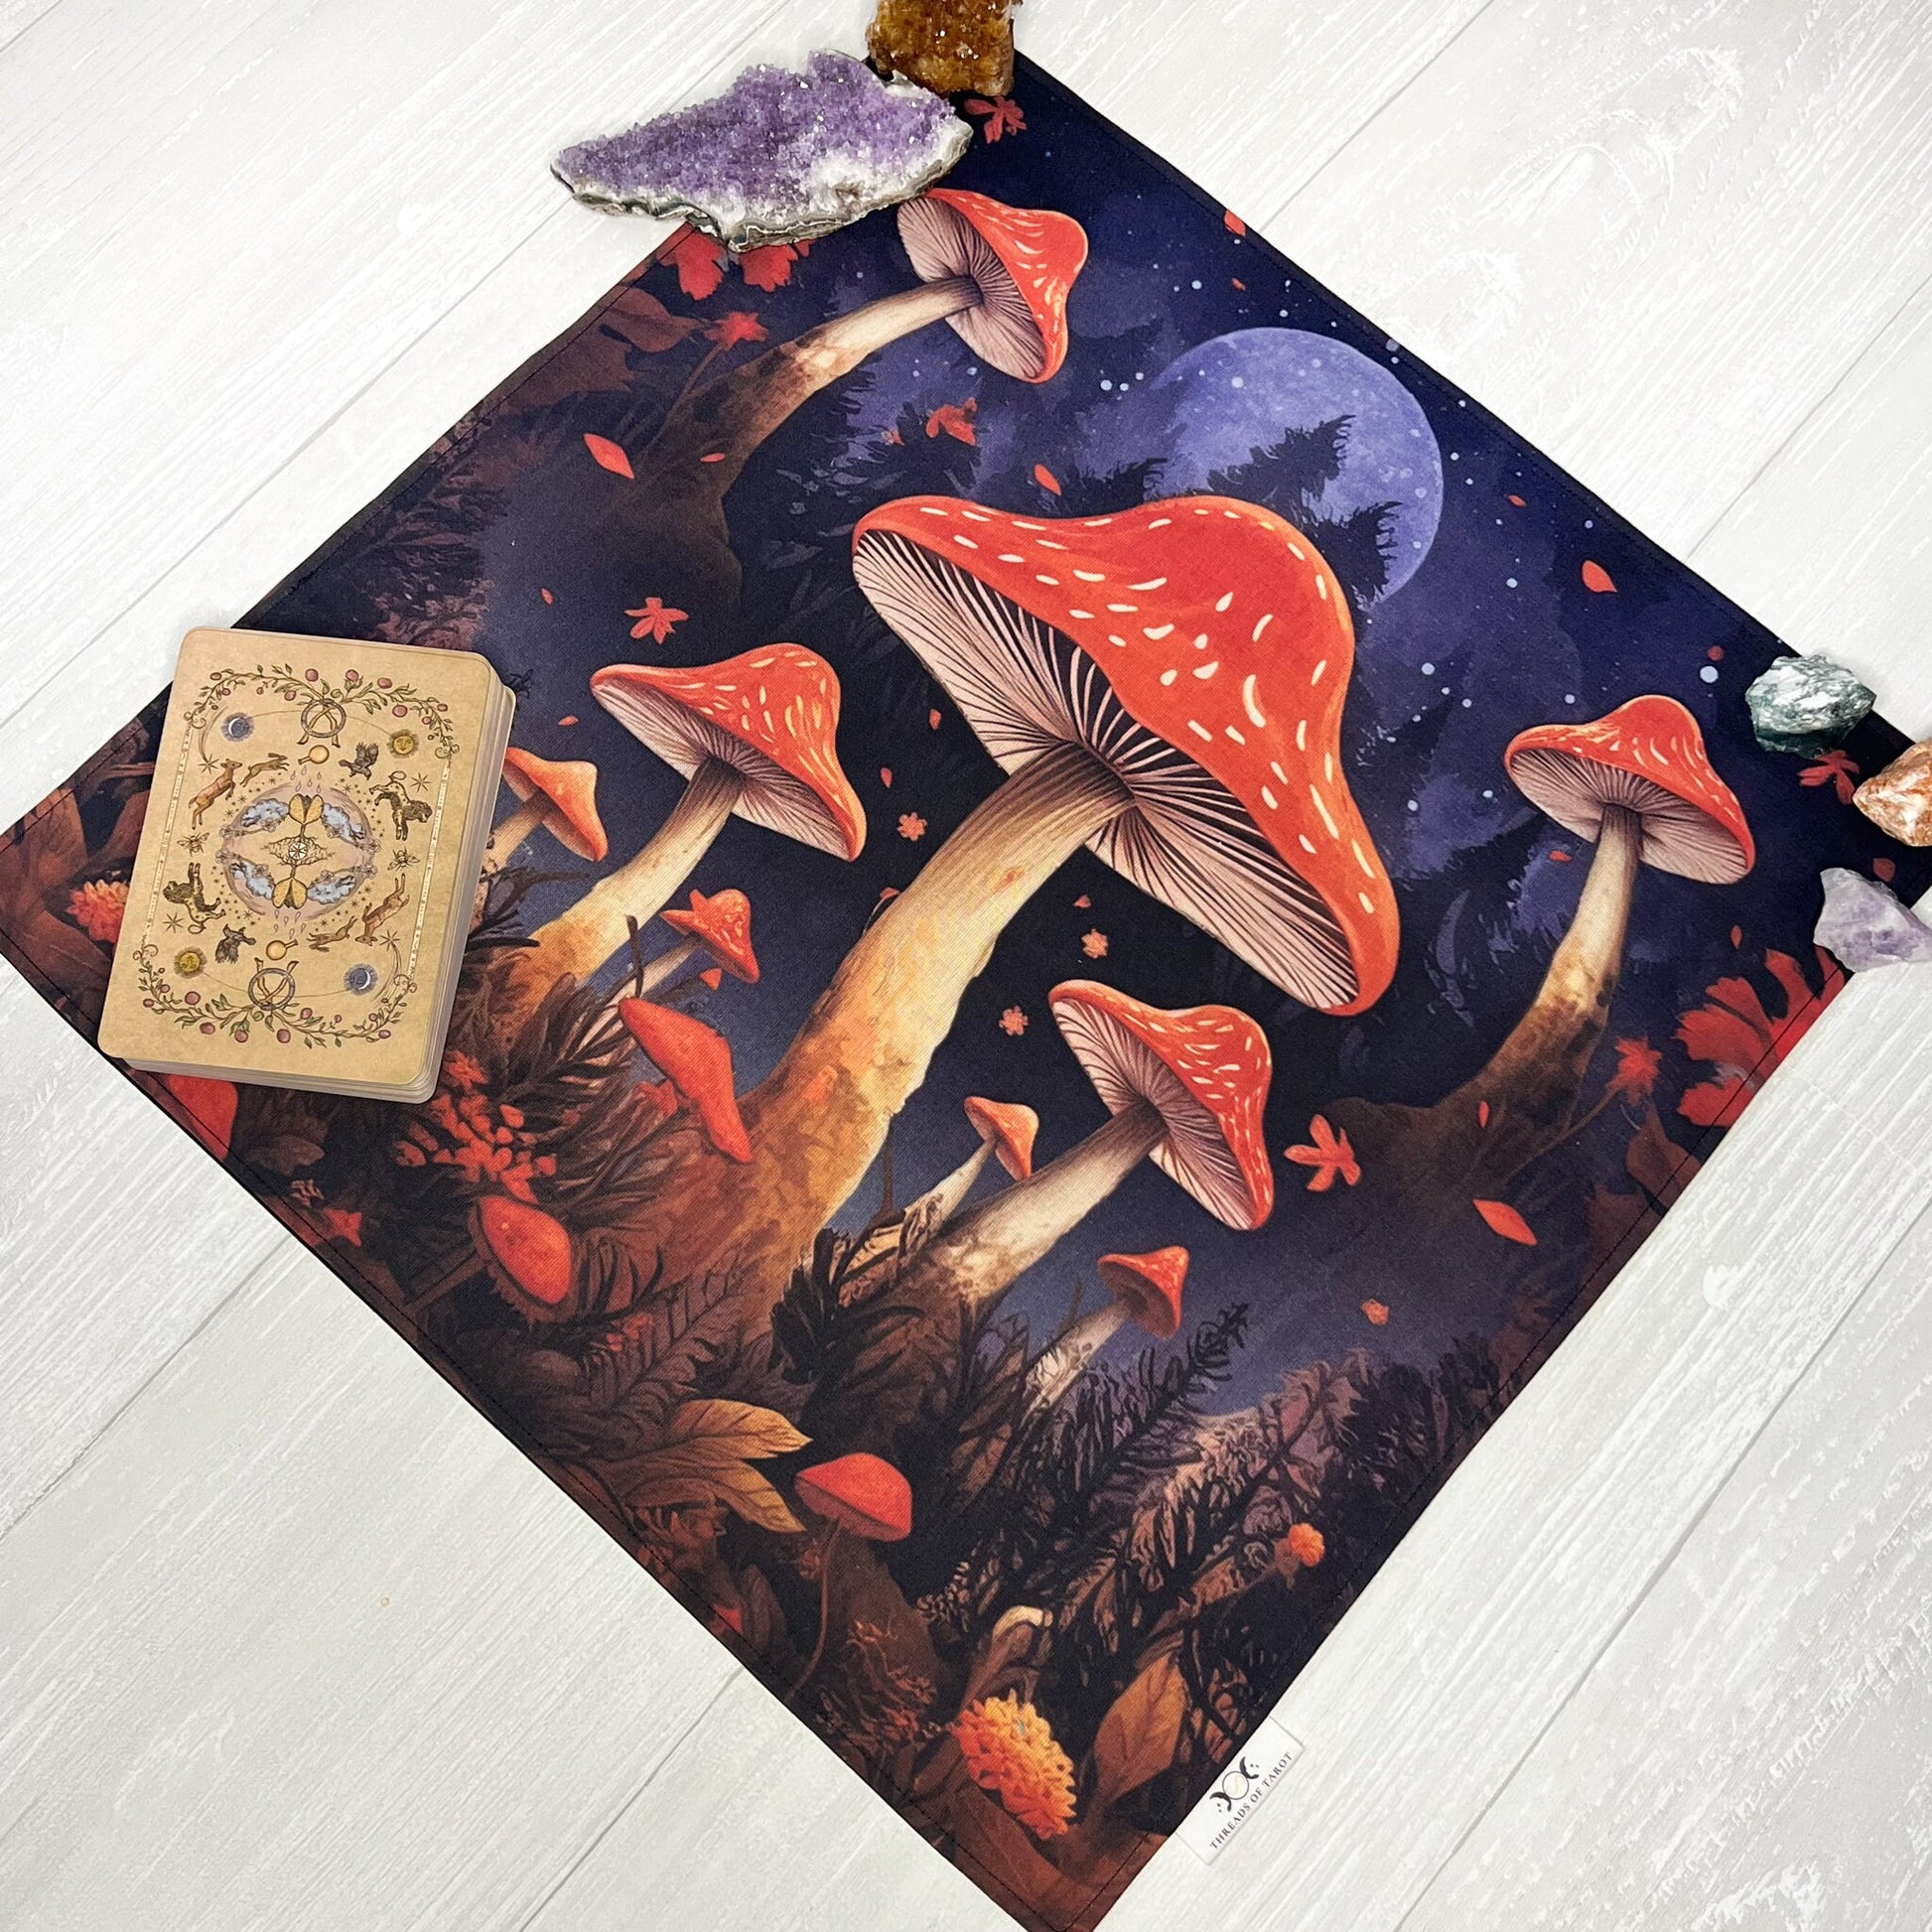 Mushroom Altar Cloth, Witchy Altar Decor, Tarot Reading Cloth, Earthy Tarot Reading Supplies and Accessories, Rune Casting Cloth, Witch Gift